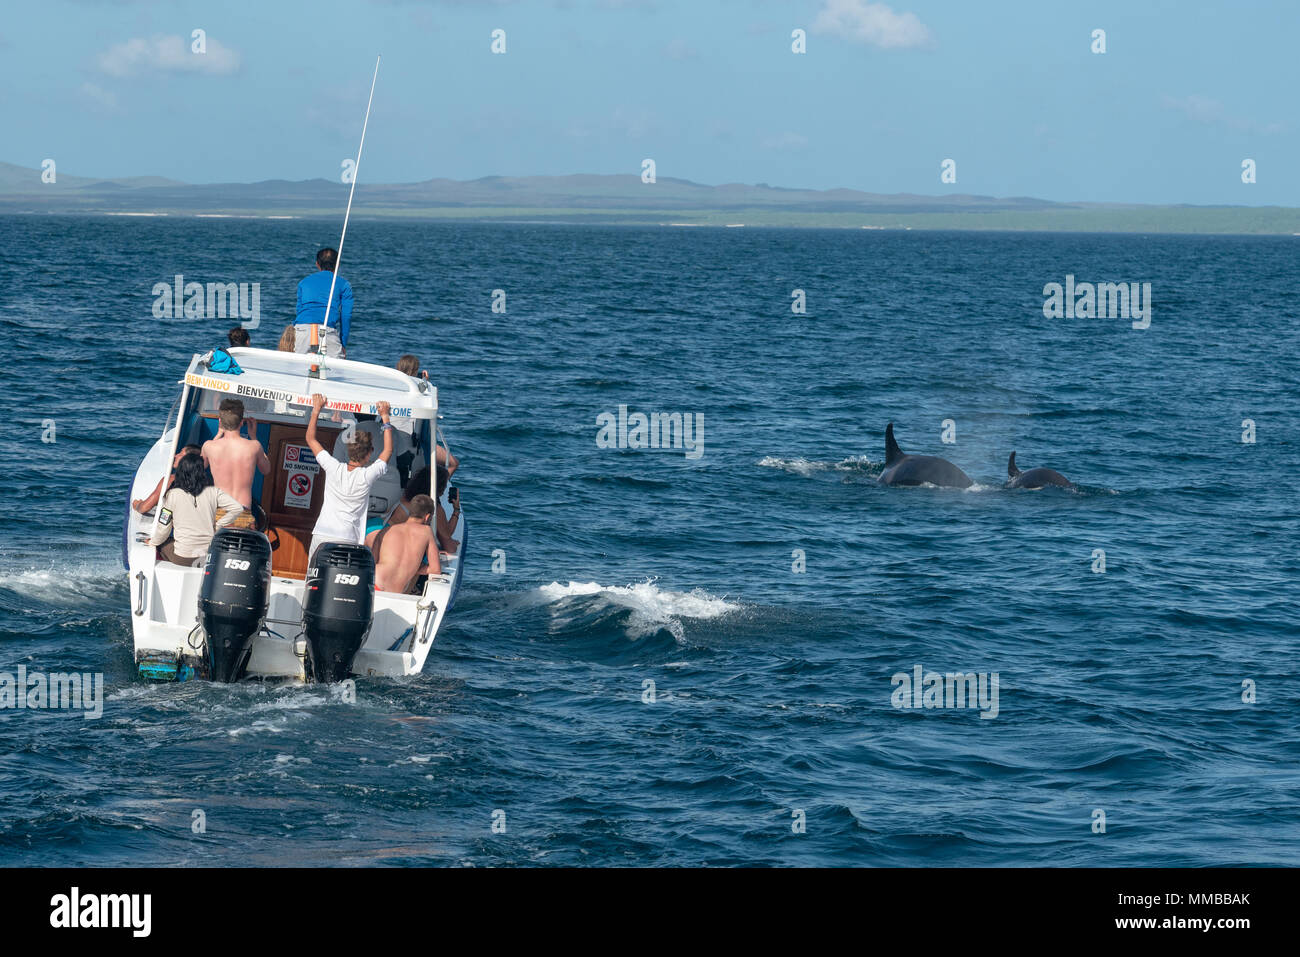 Orcas, also known as killer whales, and whale watchers, off the coast of San Cristobal Island in Ecuador's Galapagos Islands. Stock Photo